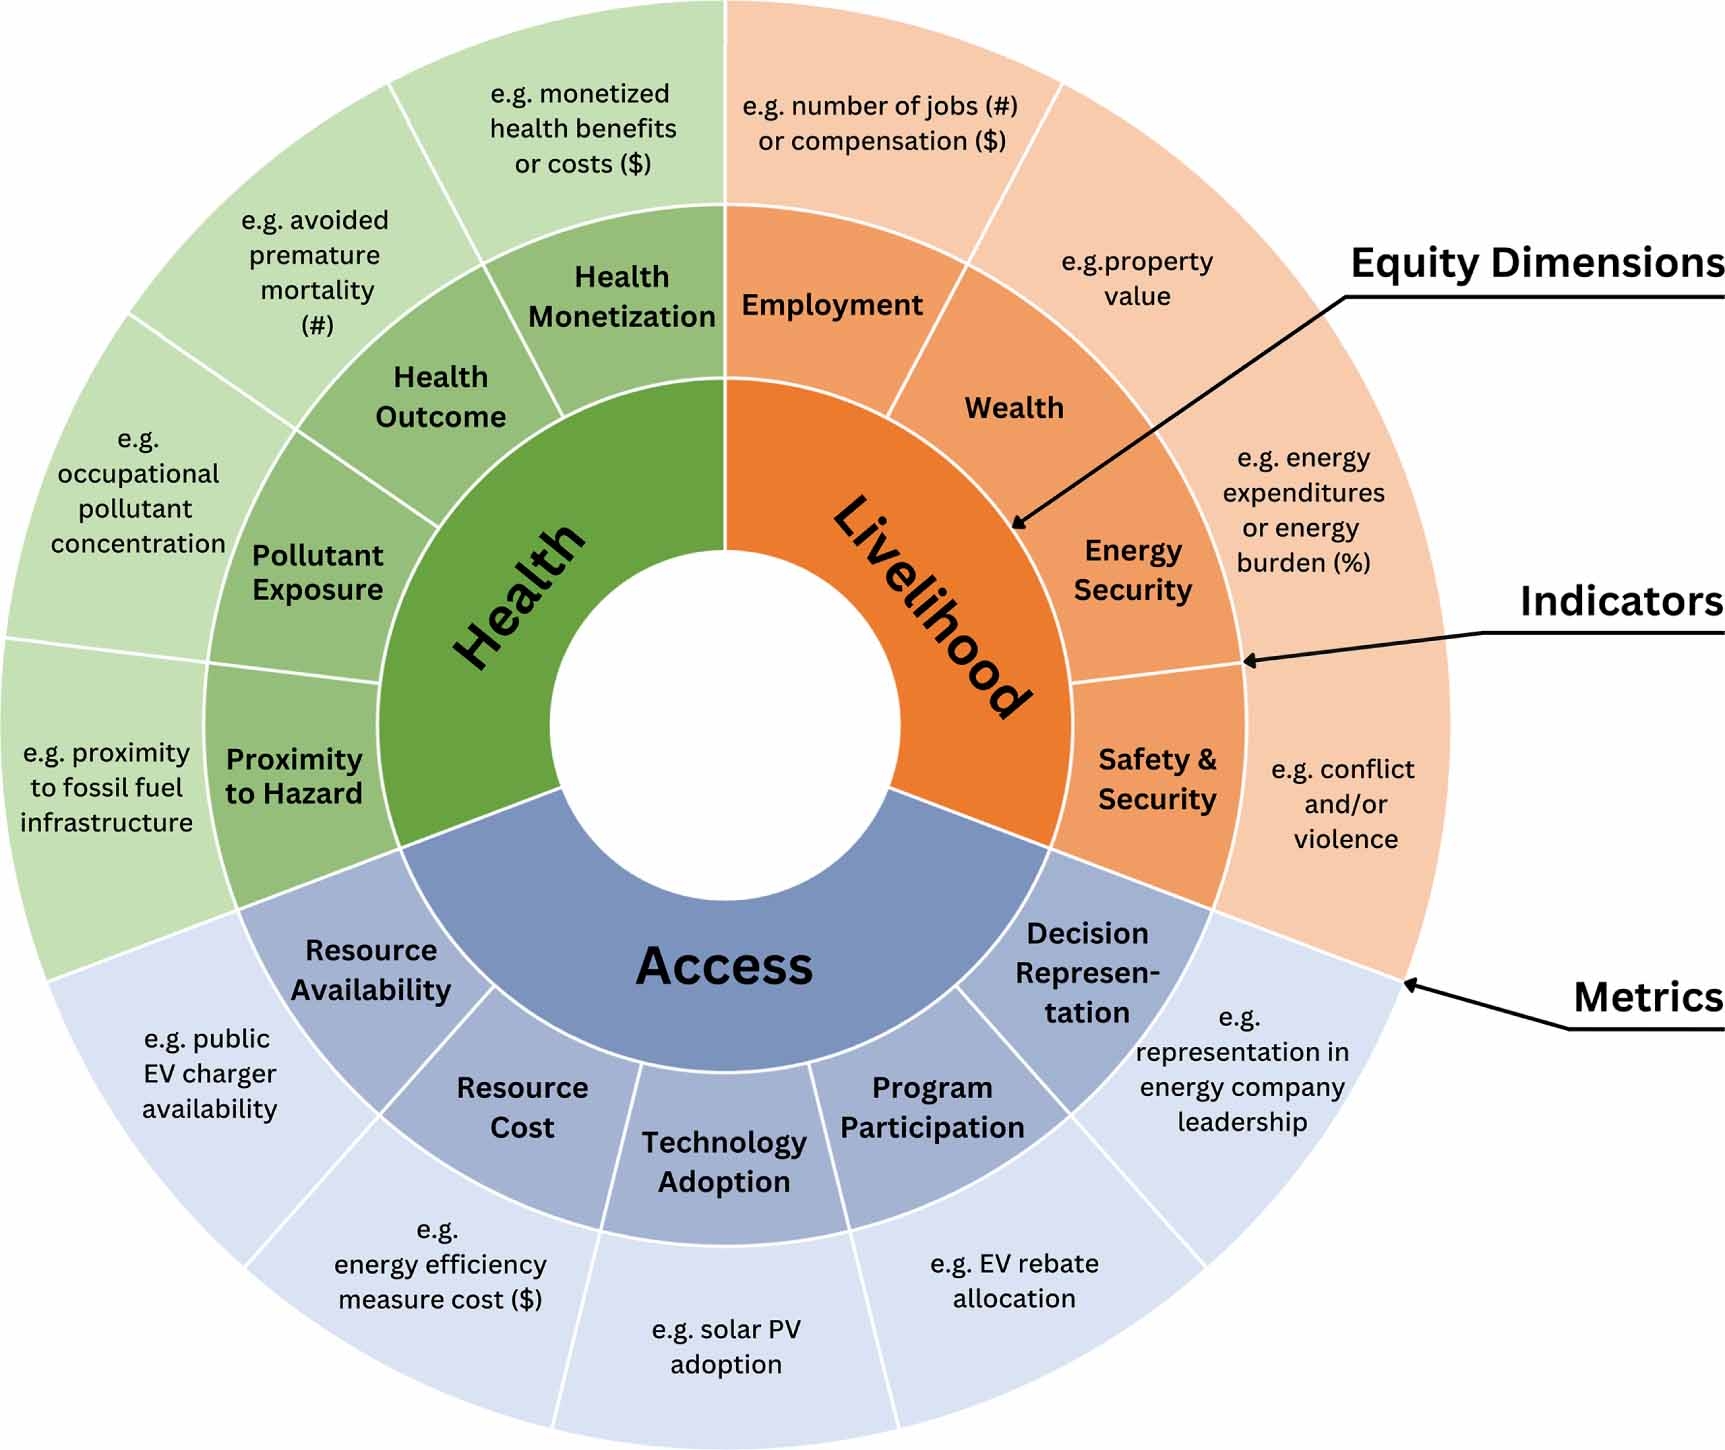 A circular chart illustrating a research framework for evaluating energy equity